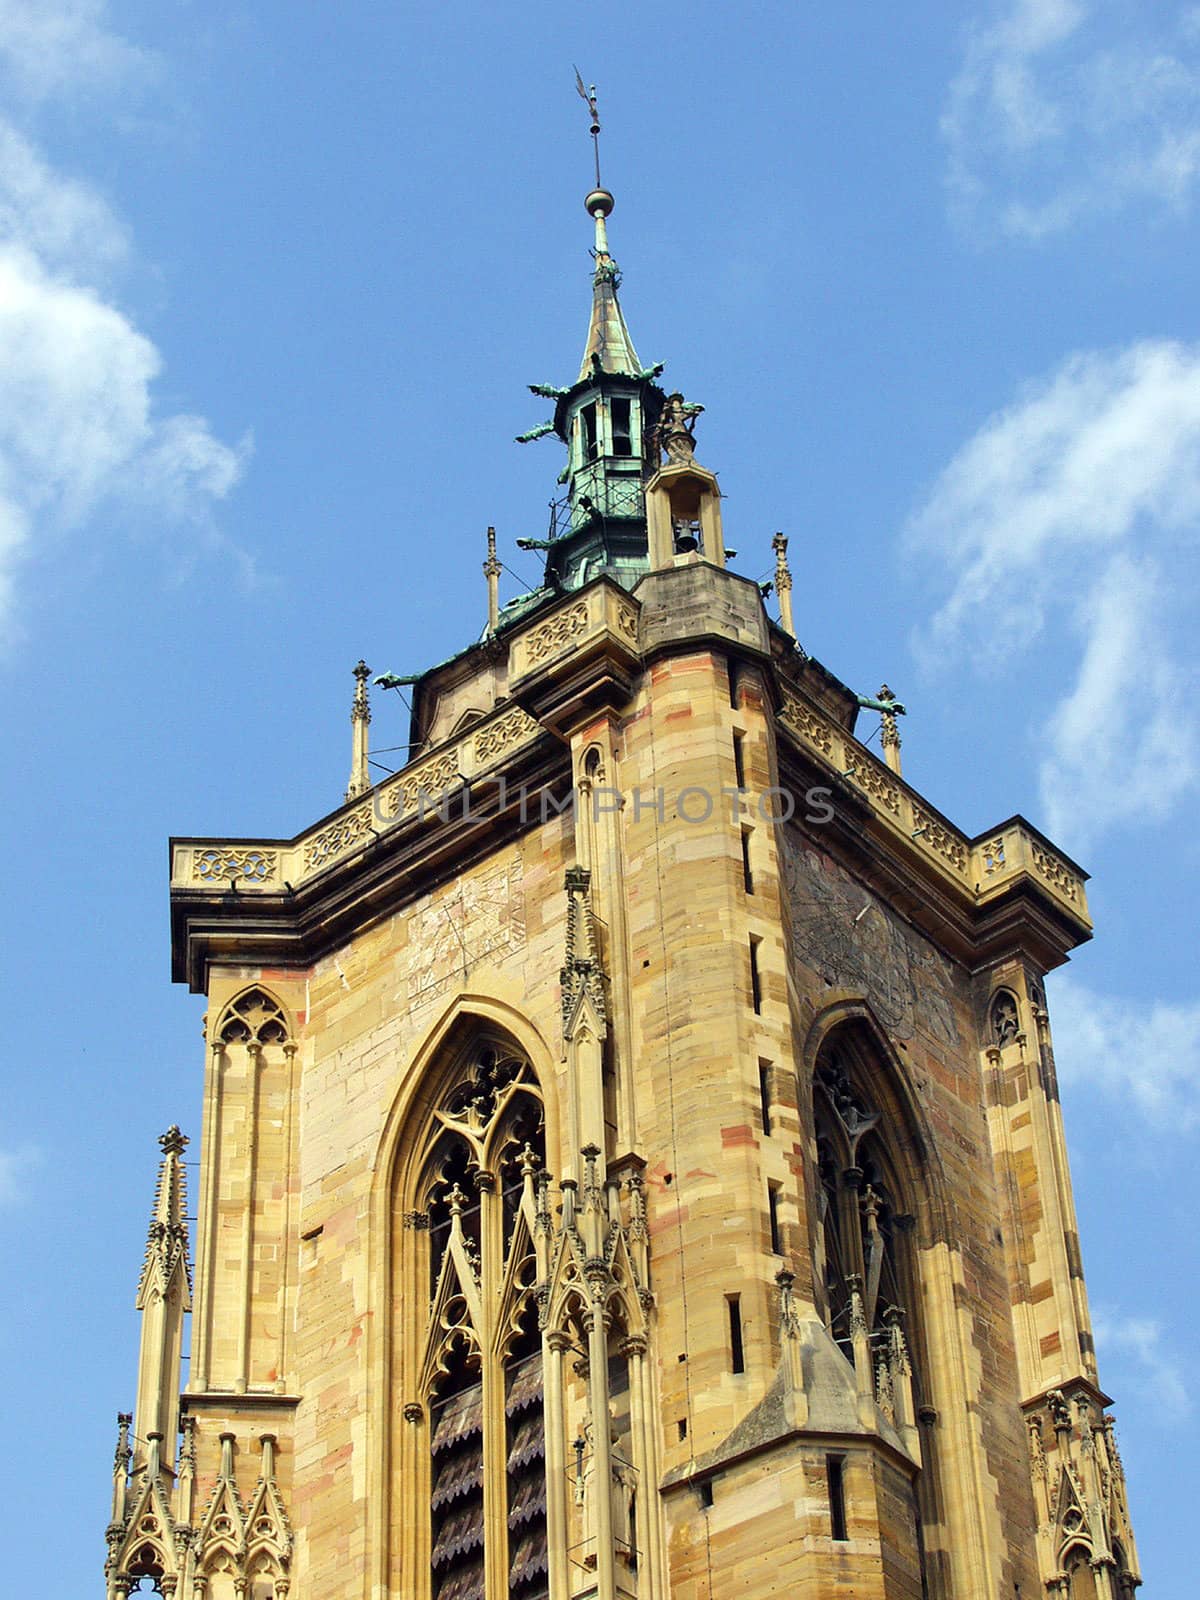 The bell tower of the church. Colmar, France